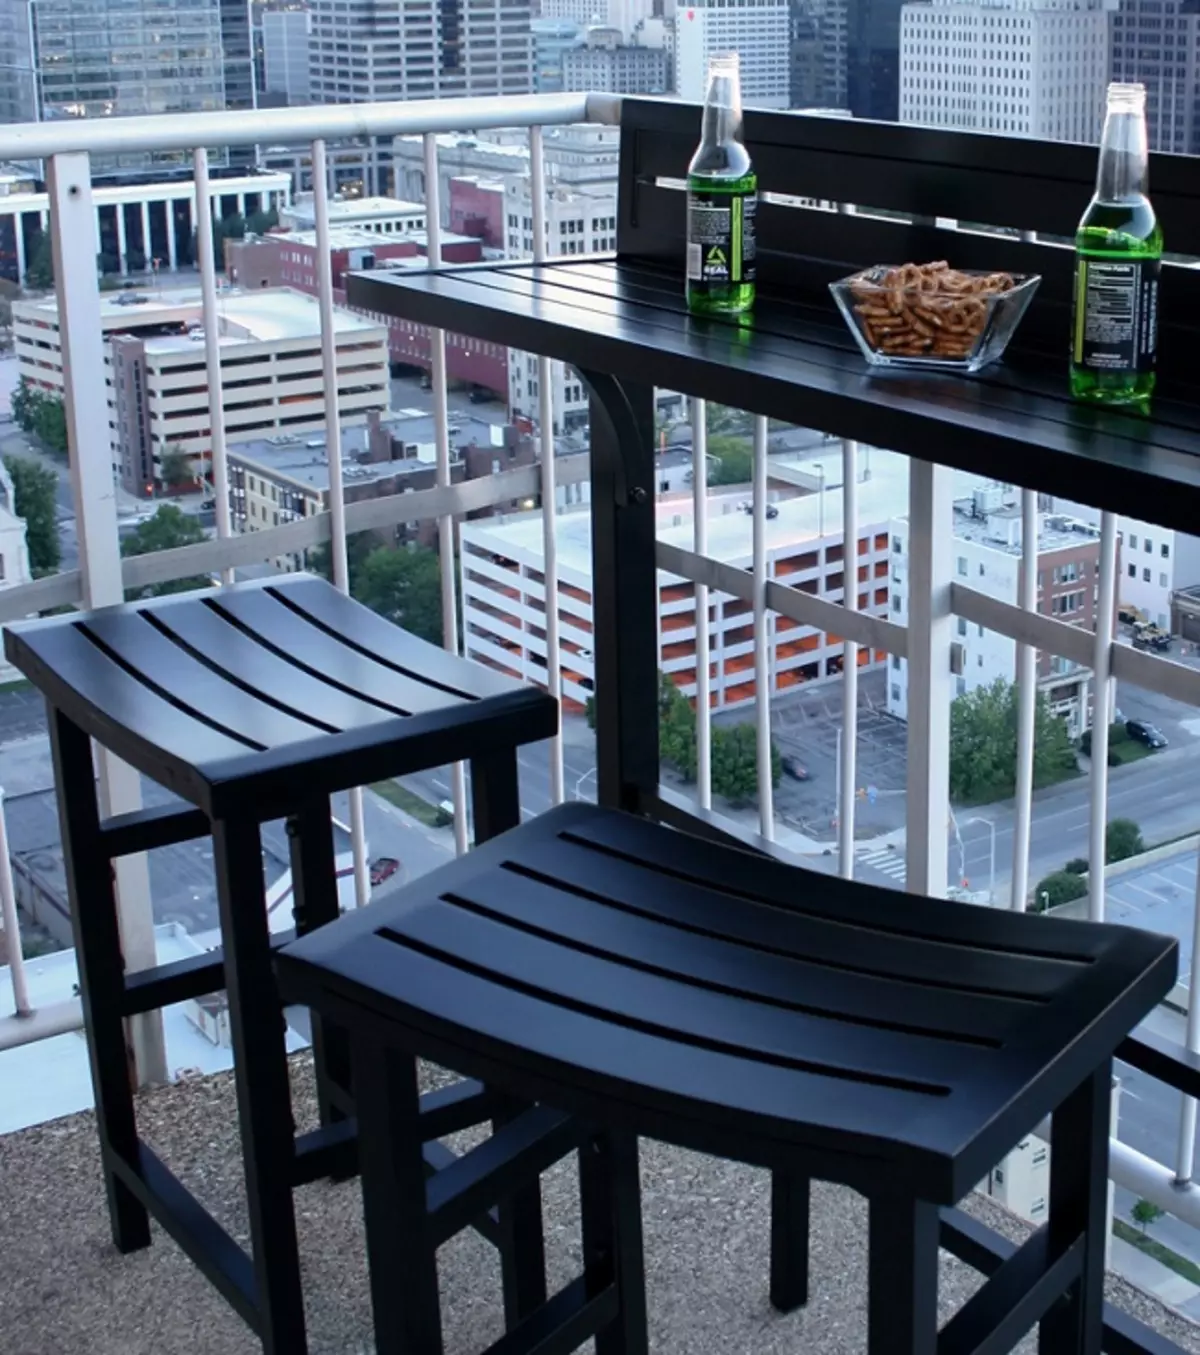 Bar rack on the balcony (44 photos): Stand design from the window sill on the balcony. Bar rack options with chairs instead of a balcony block 20845_9